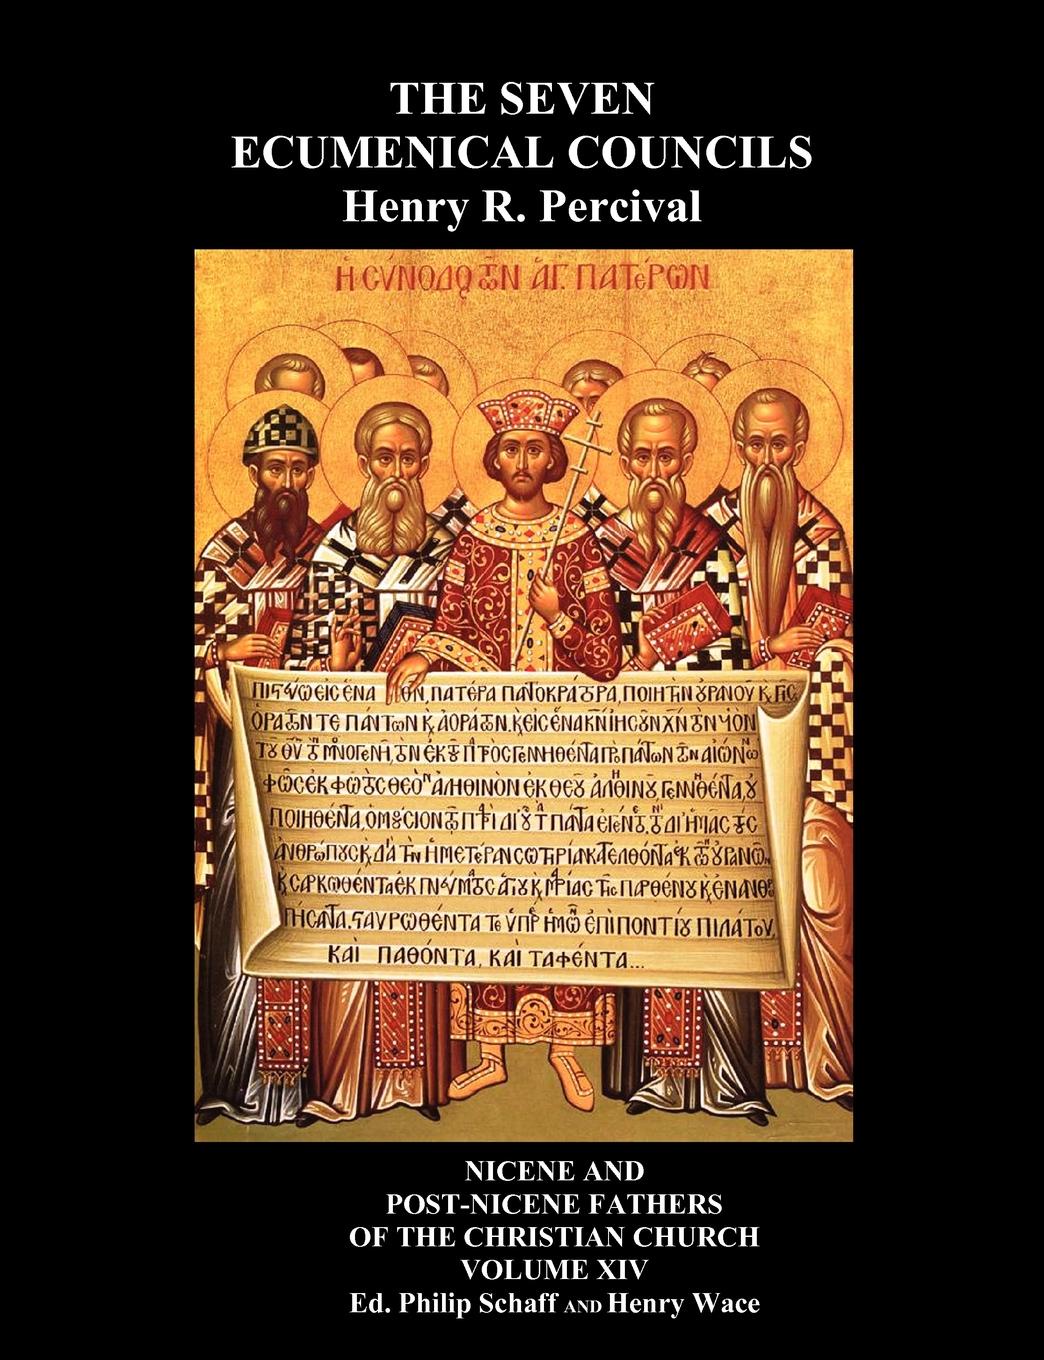 The Seven Ecumenical Councils Of The Undivided Church. Their Canons And Dogmatic Decrees  Together With The Canons Of All The Local synods Which Have Received Ecumenical Acceptance. Edited With Notes Gathered From The Writings Of The Greatest Scho...